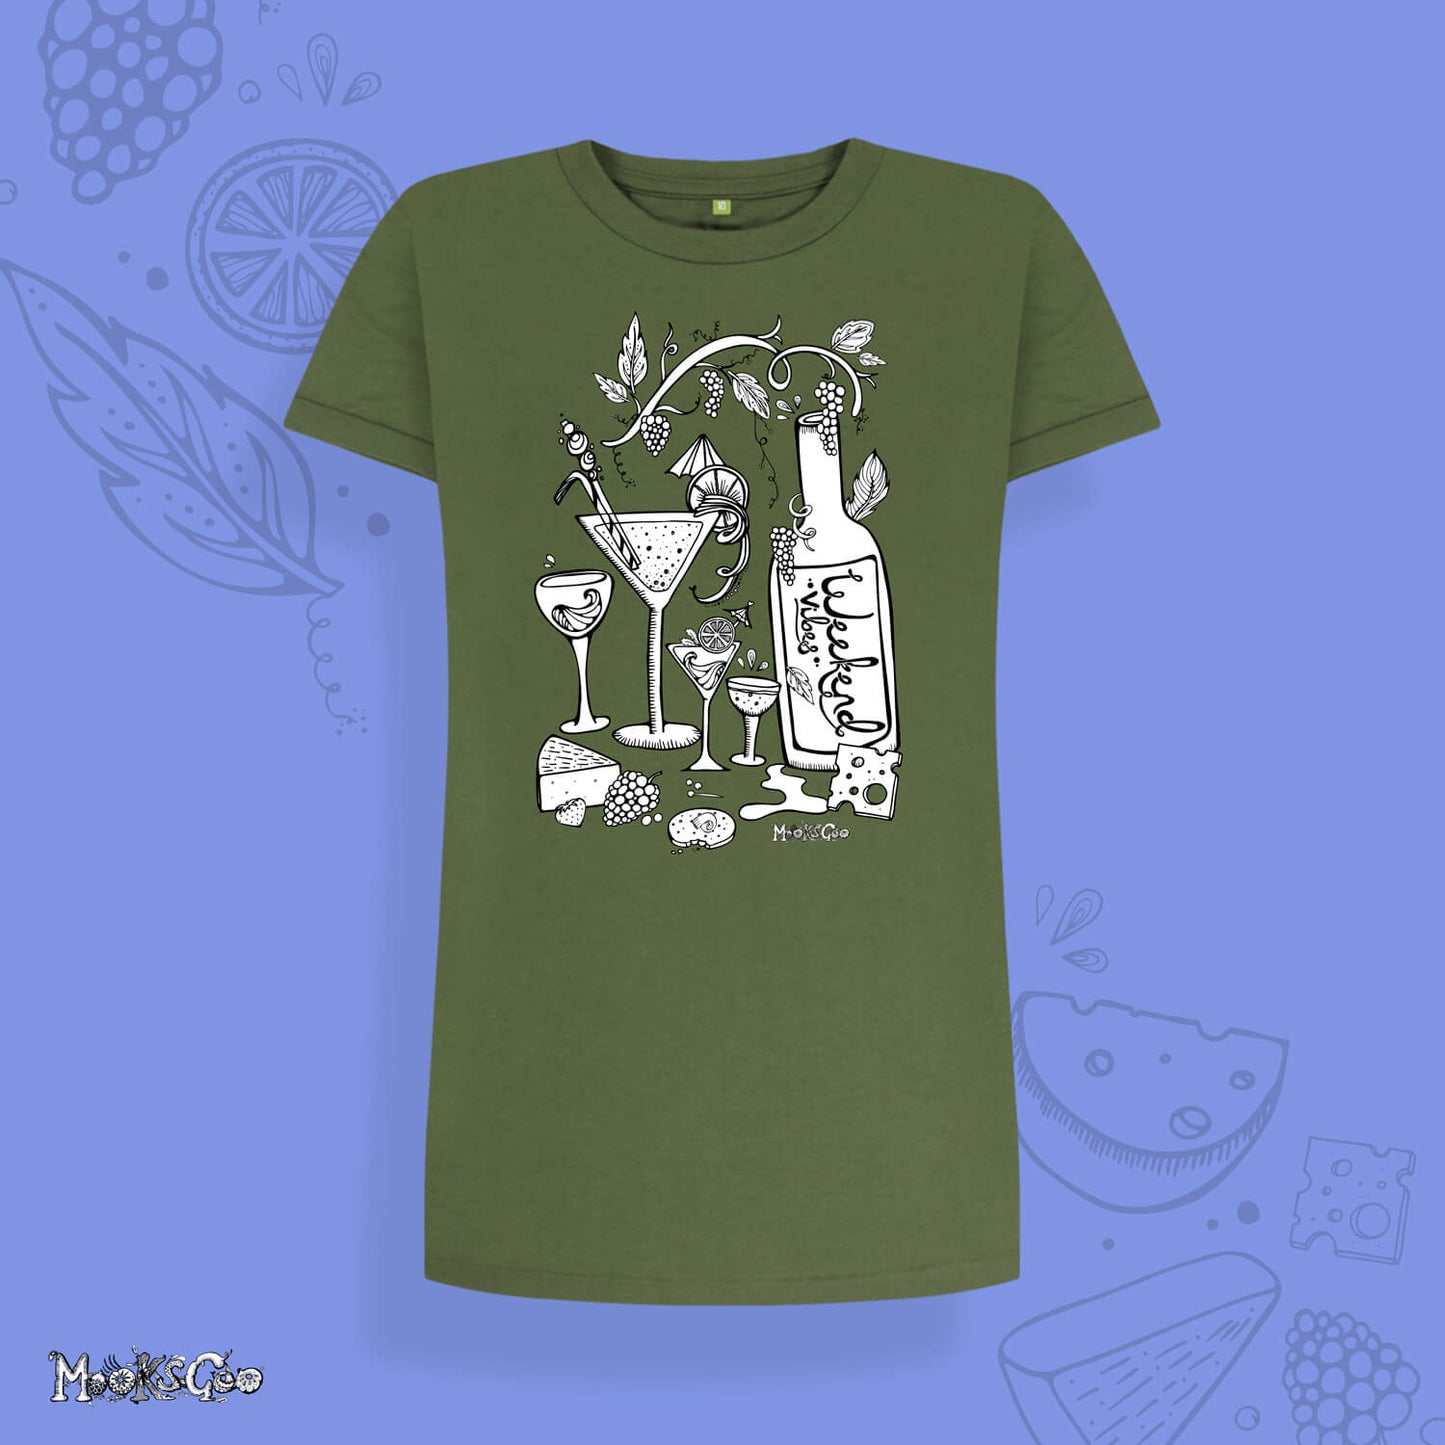 Khaki oversized t-shirt dress with bold black and white picture of cheese and wine themed illustration on a long, oversized and relaxed t-shirt dress. It shows a bottle of wine, cocktails, brie cheese, grapes and biscuits - great for a girly night in clothing. Designed by MooksGoo  